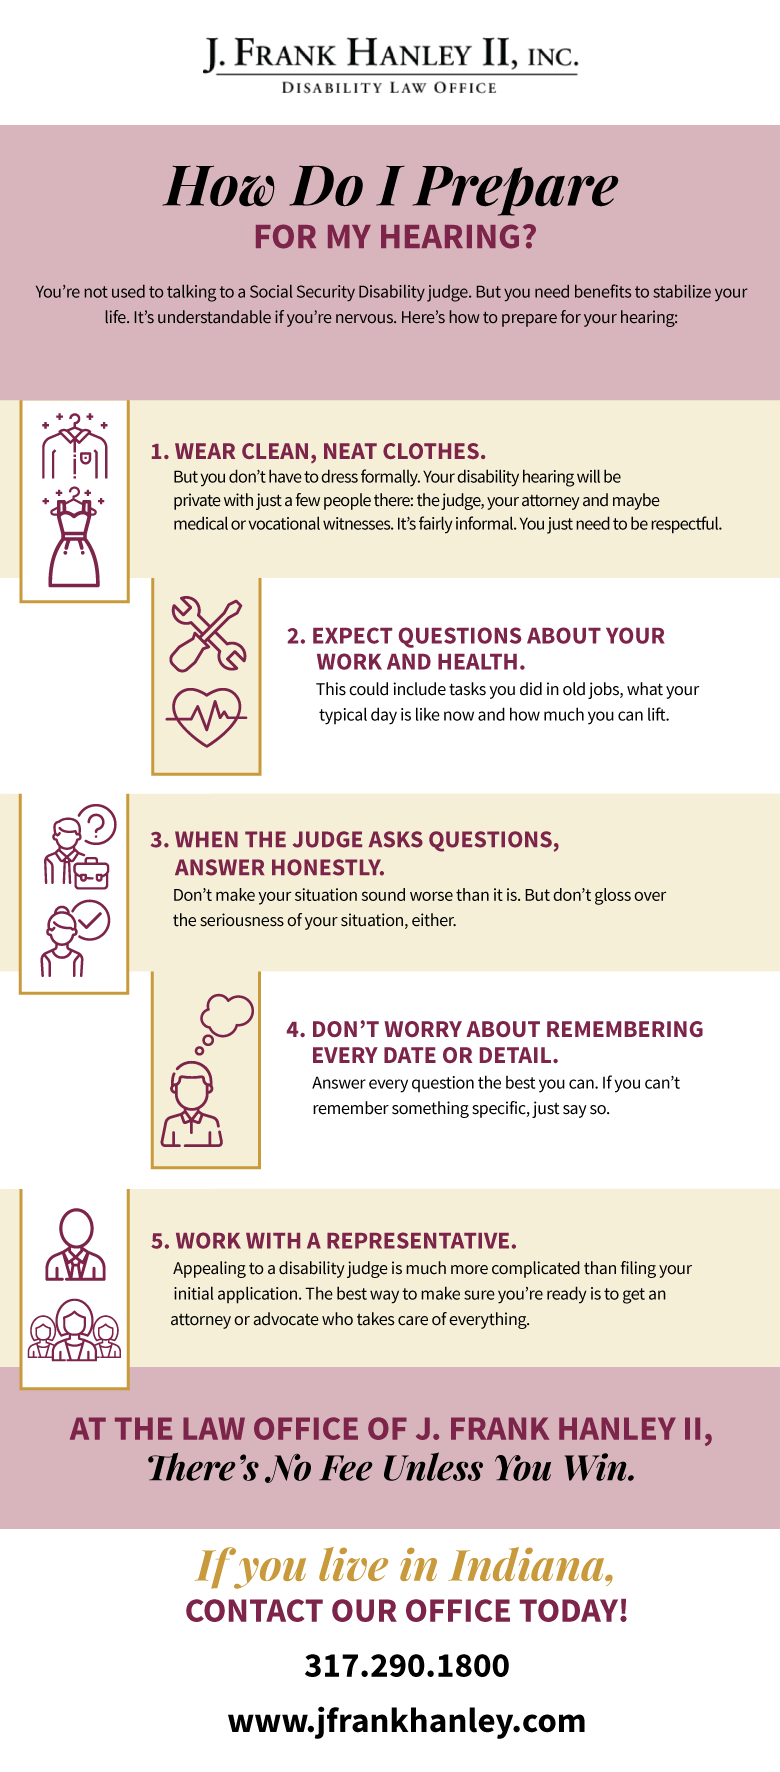 How Do I Prepare for My Hearing Infographic